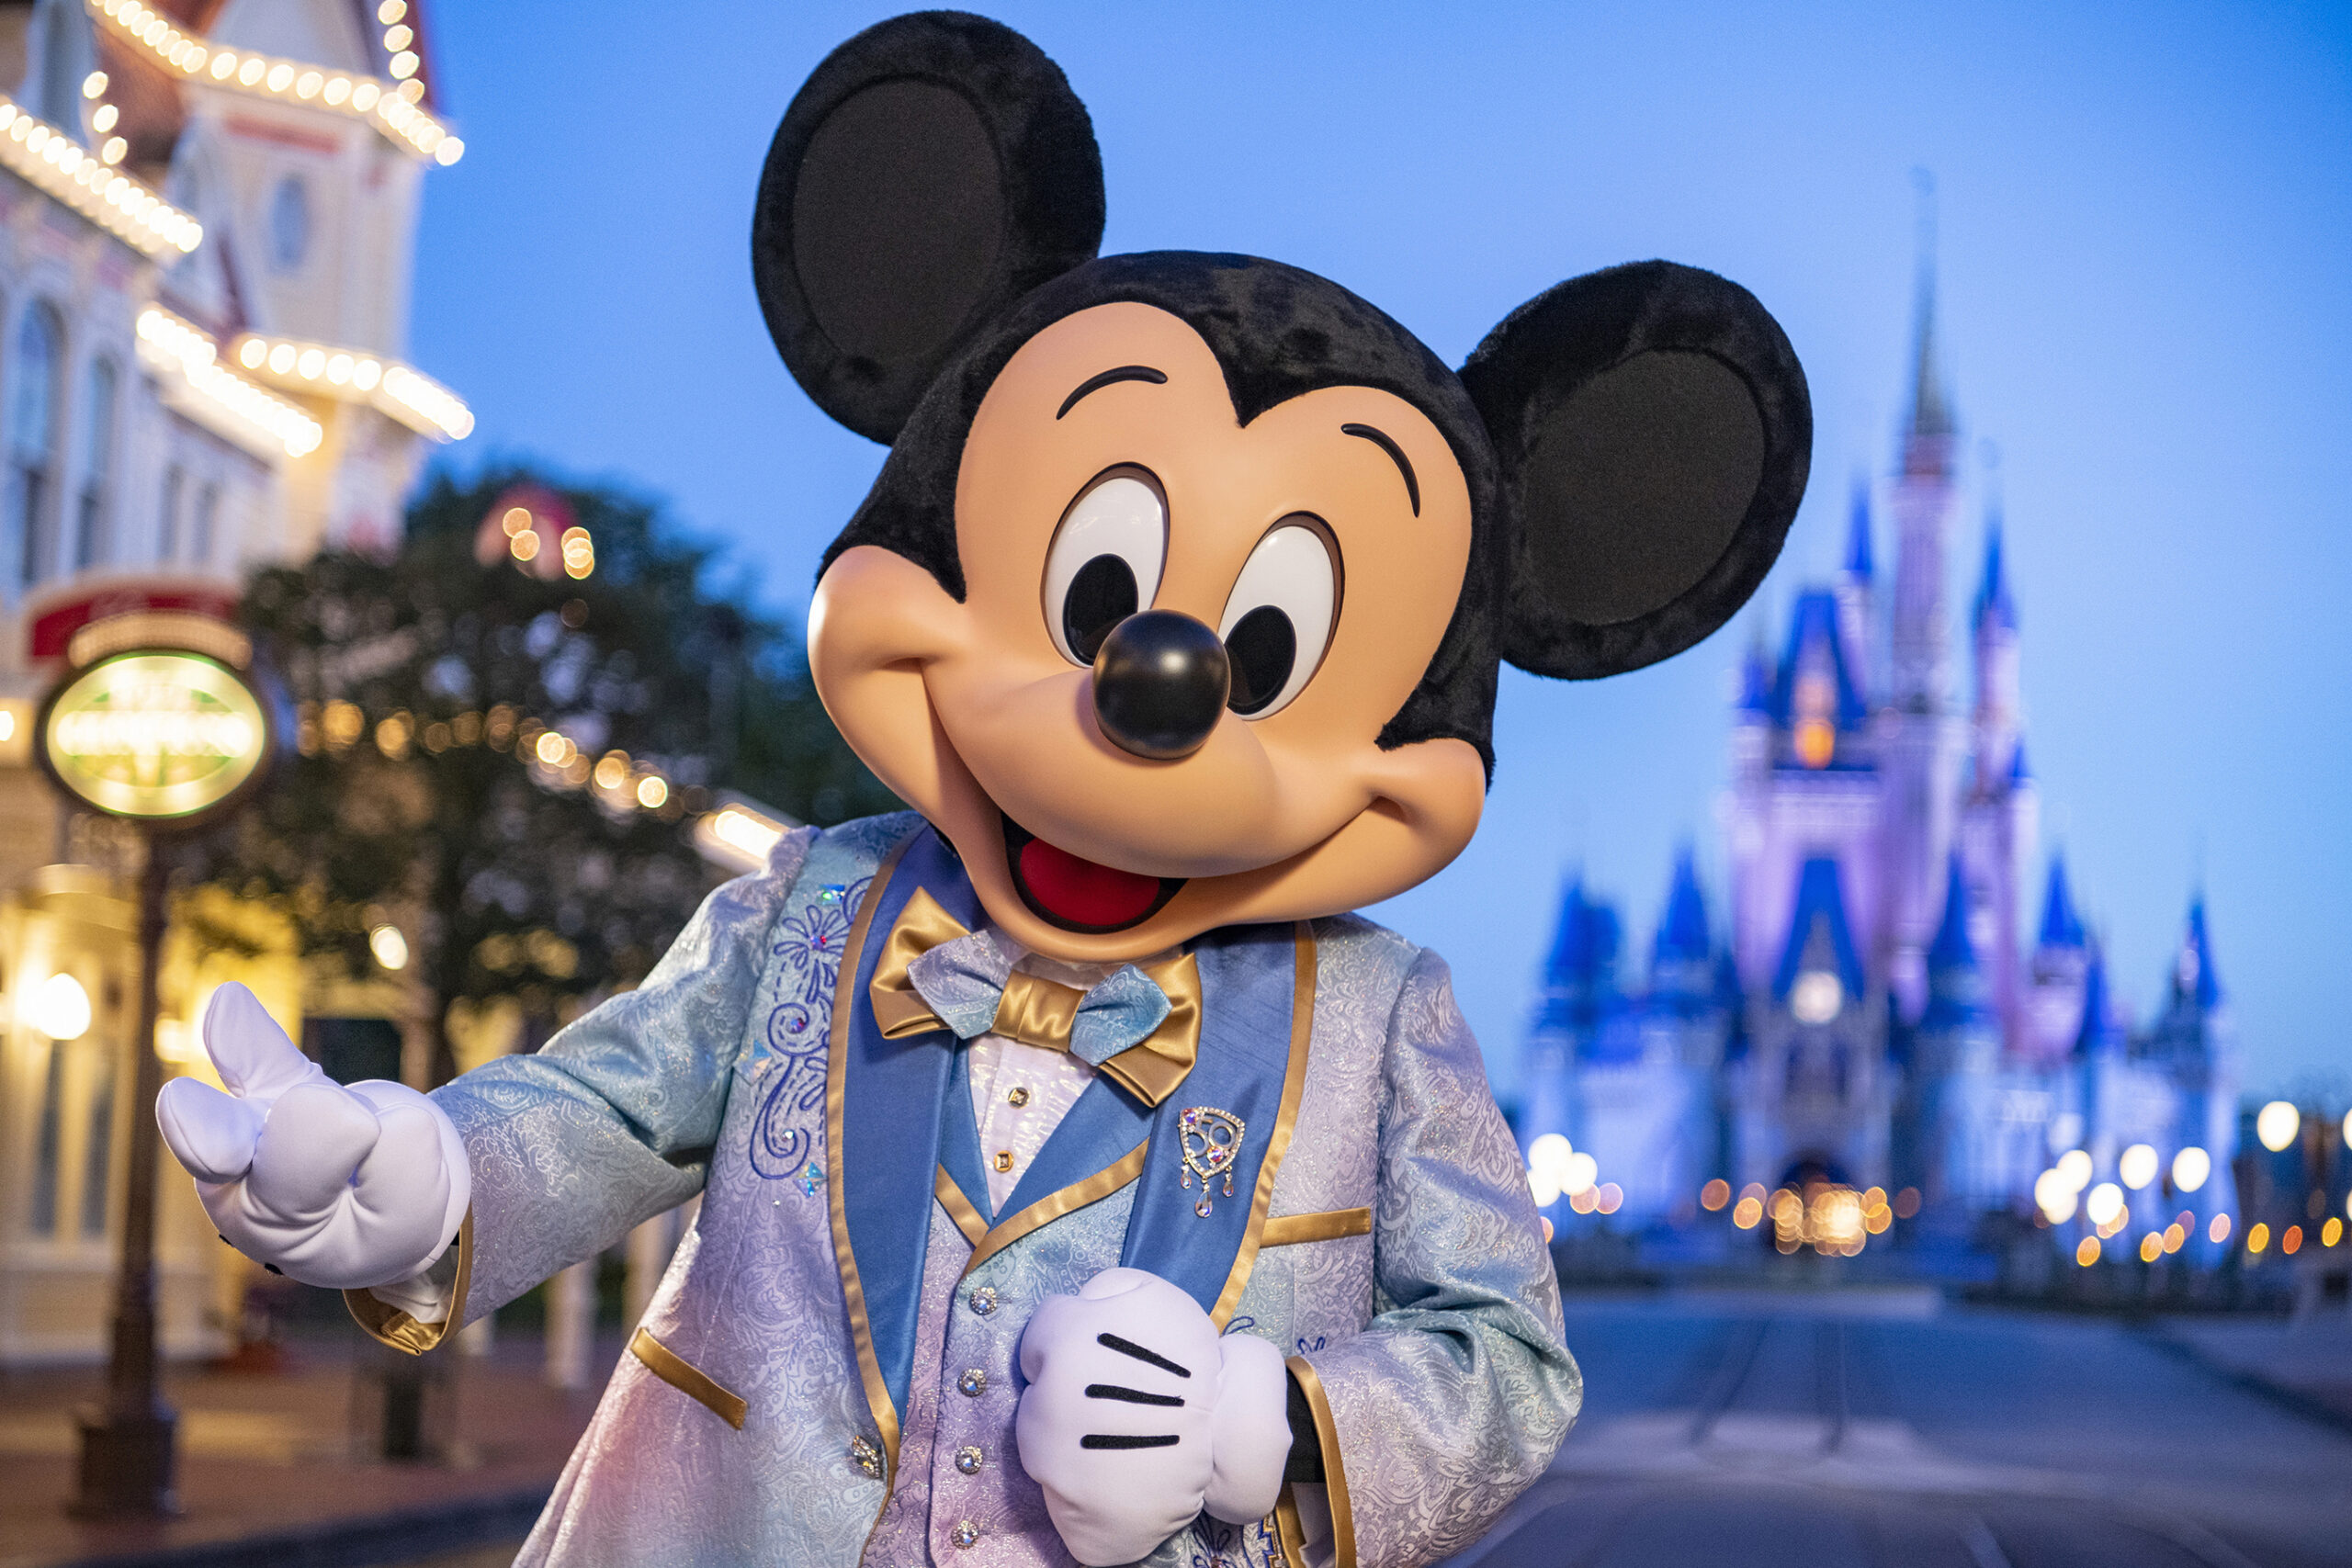 A closer look at Mickey & Minnie's 50th Anniversary outfits